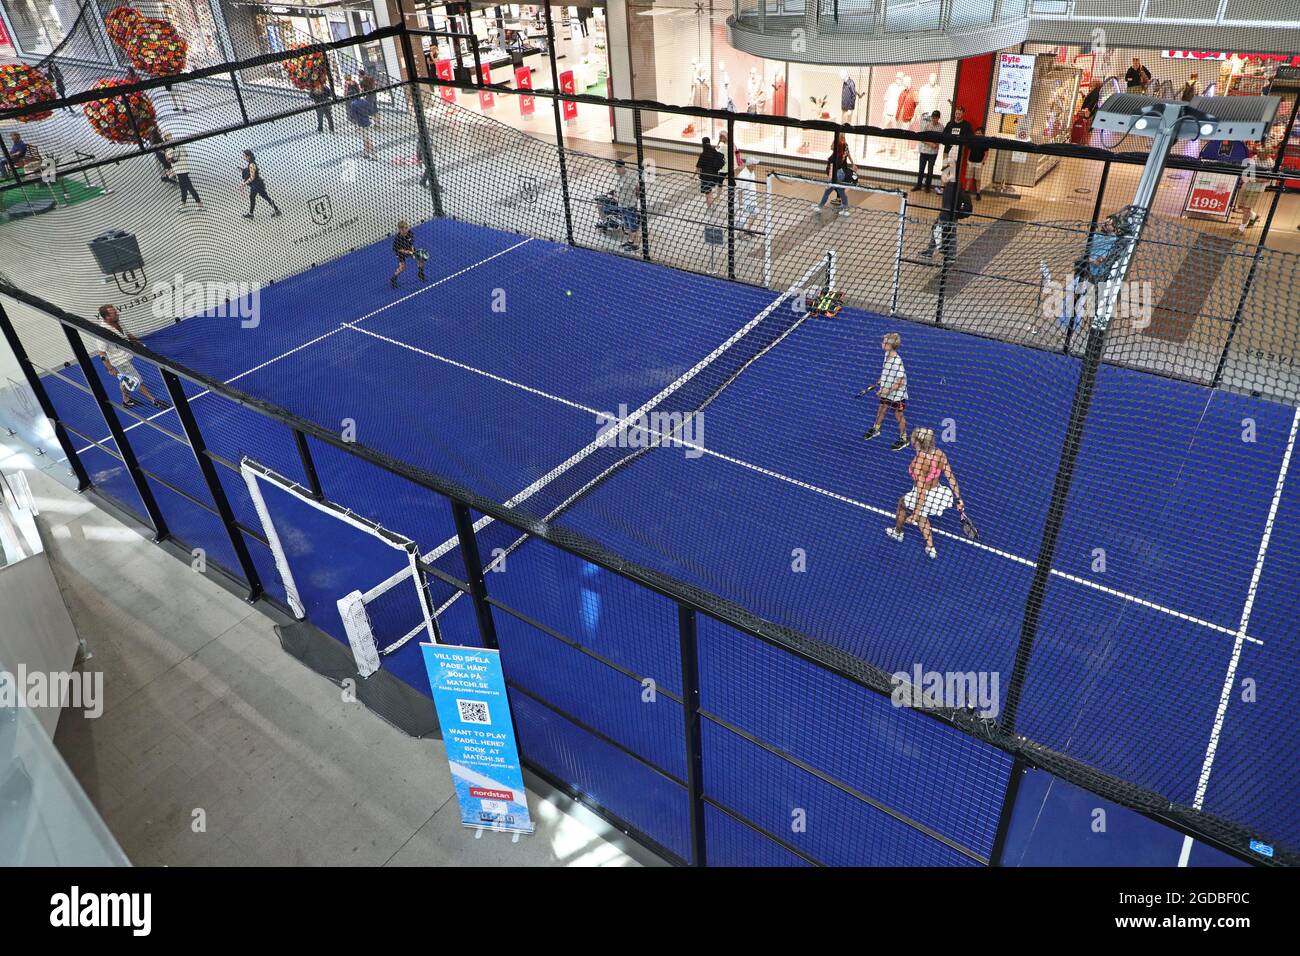 Some who play paddle tennis on a paddle tennis court in the shopping center  Nordstan, Gothenburg Stock Photo - Alamy